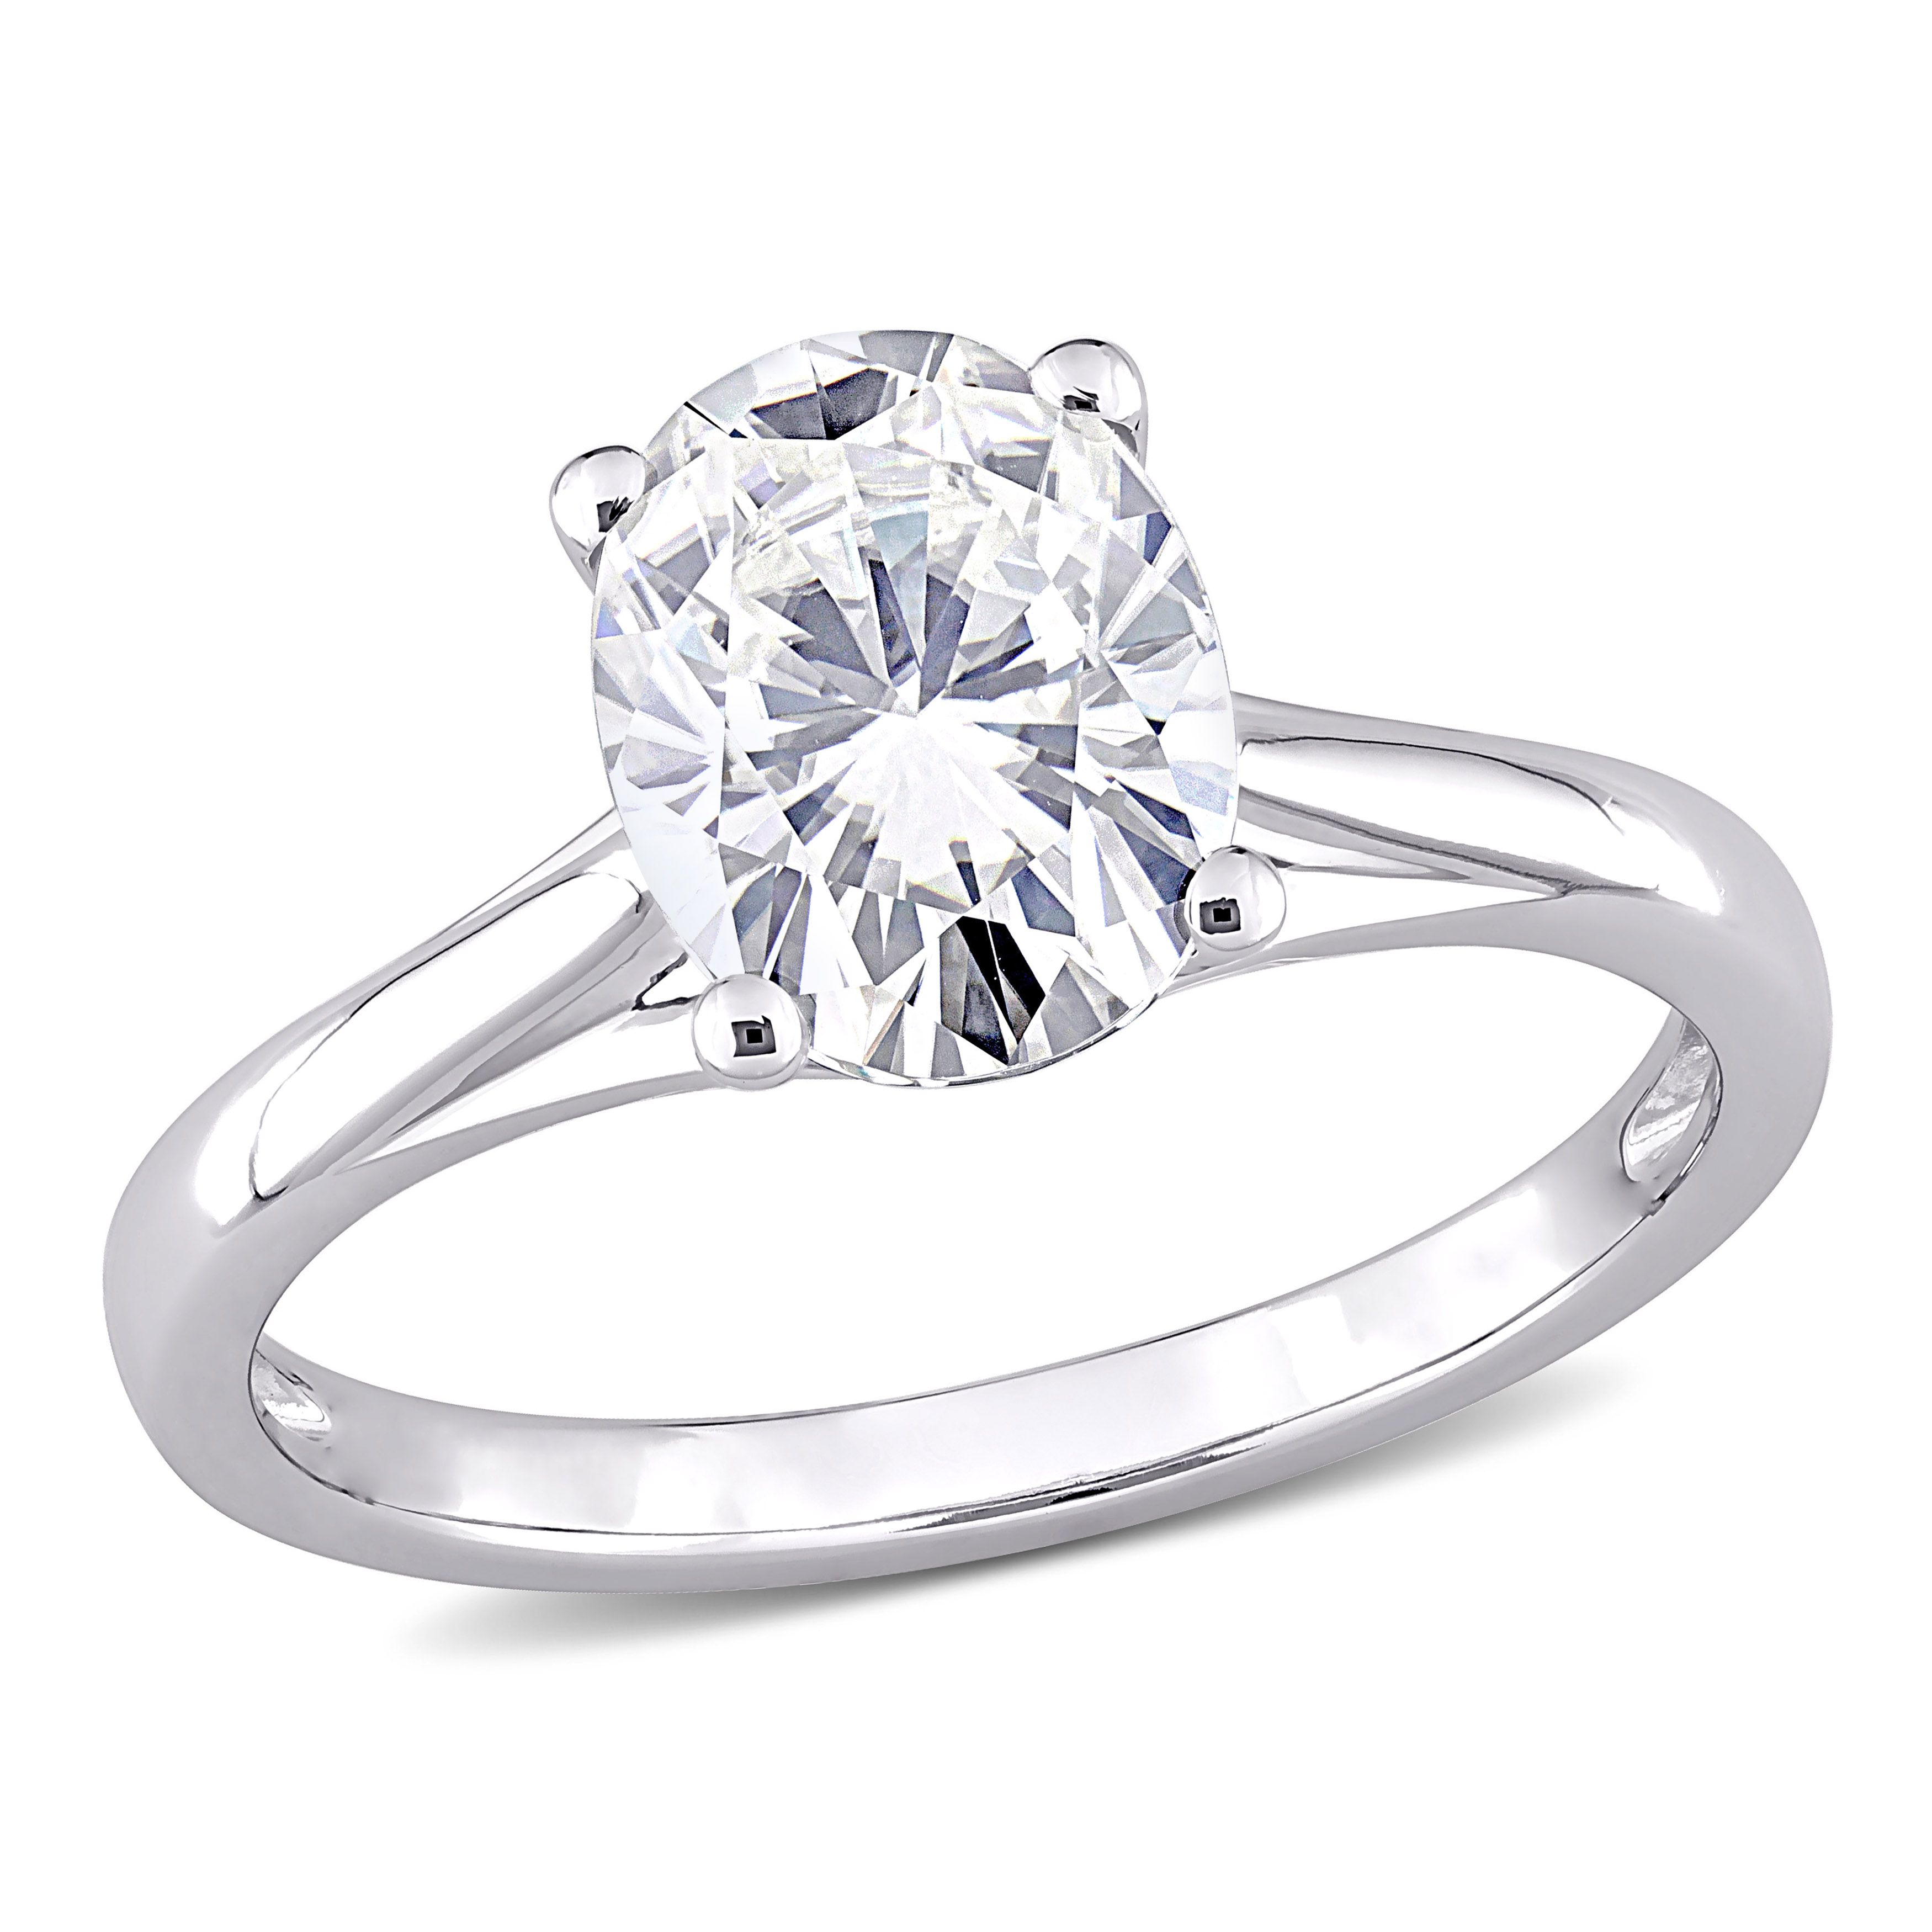 2 CT DEW Oval Shaped Created Moissanite Solitaire Ring in 10k White Gold